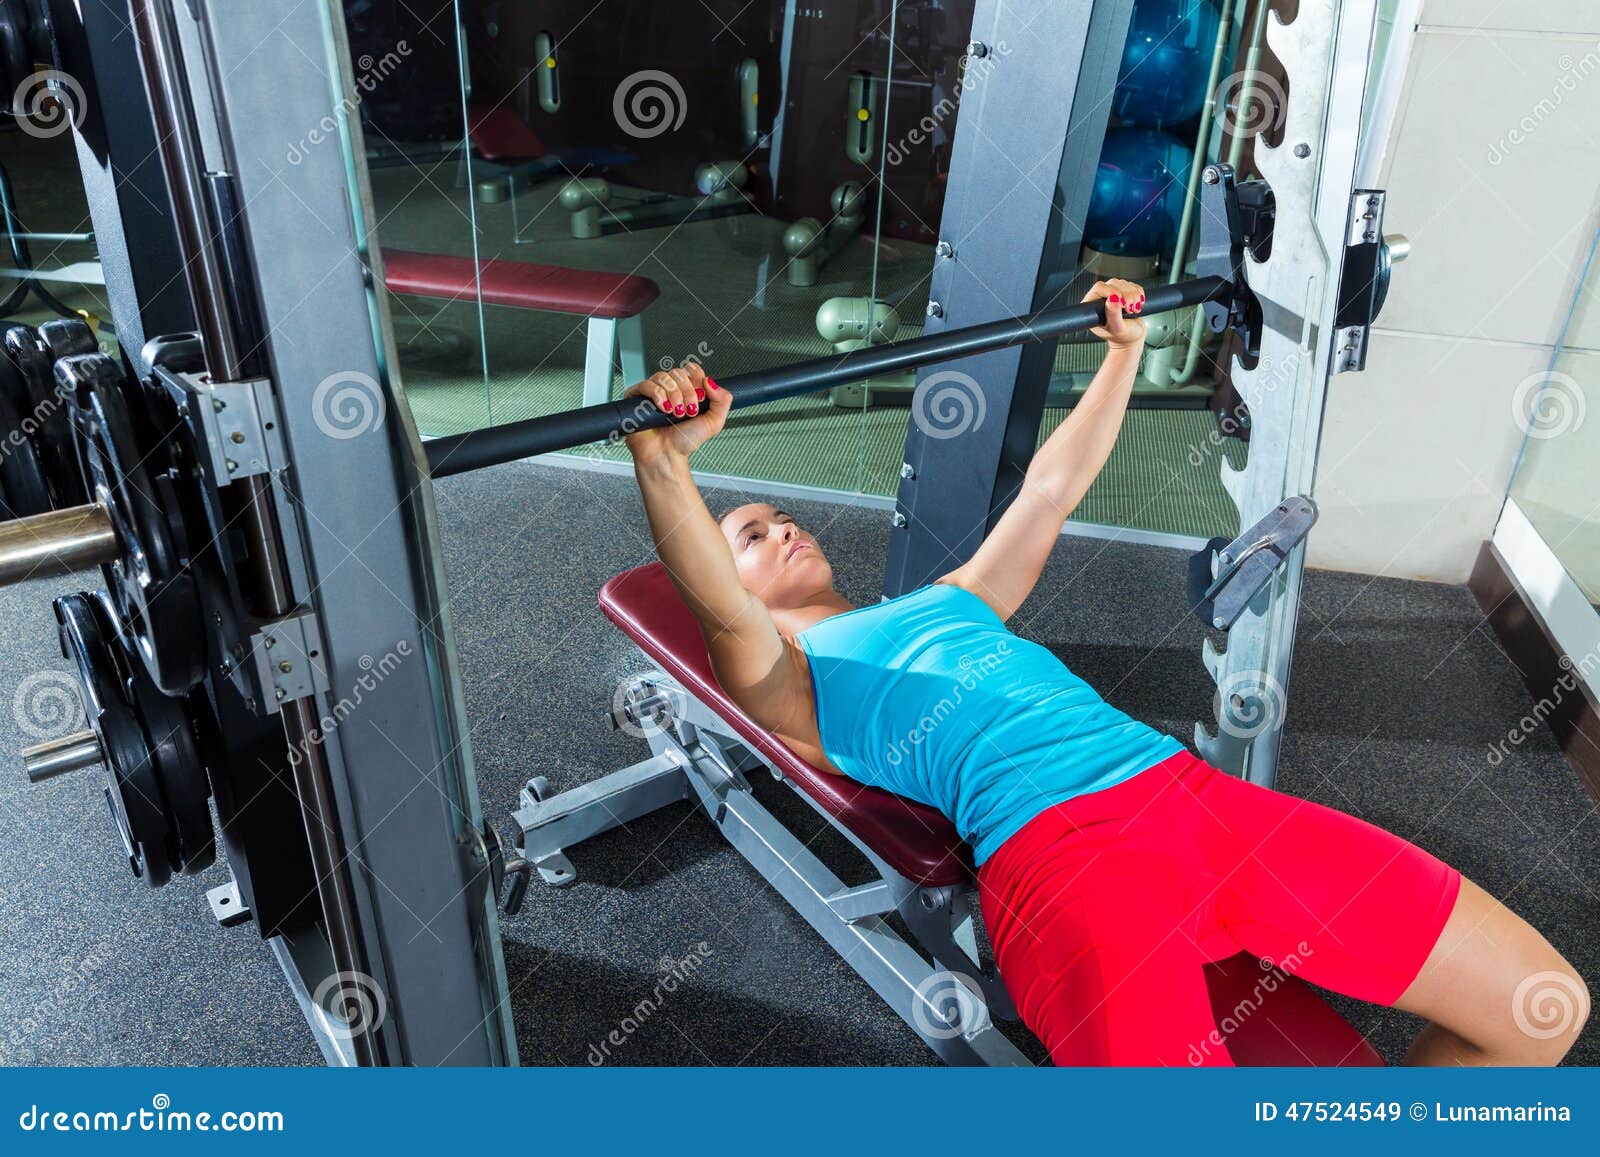 https://thumbs.dreamstime.com/z/bench-press-girl-flat-multipower-smith-machine-woman-workout-exercise-gym-47524549.jpg